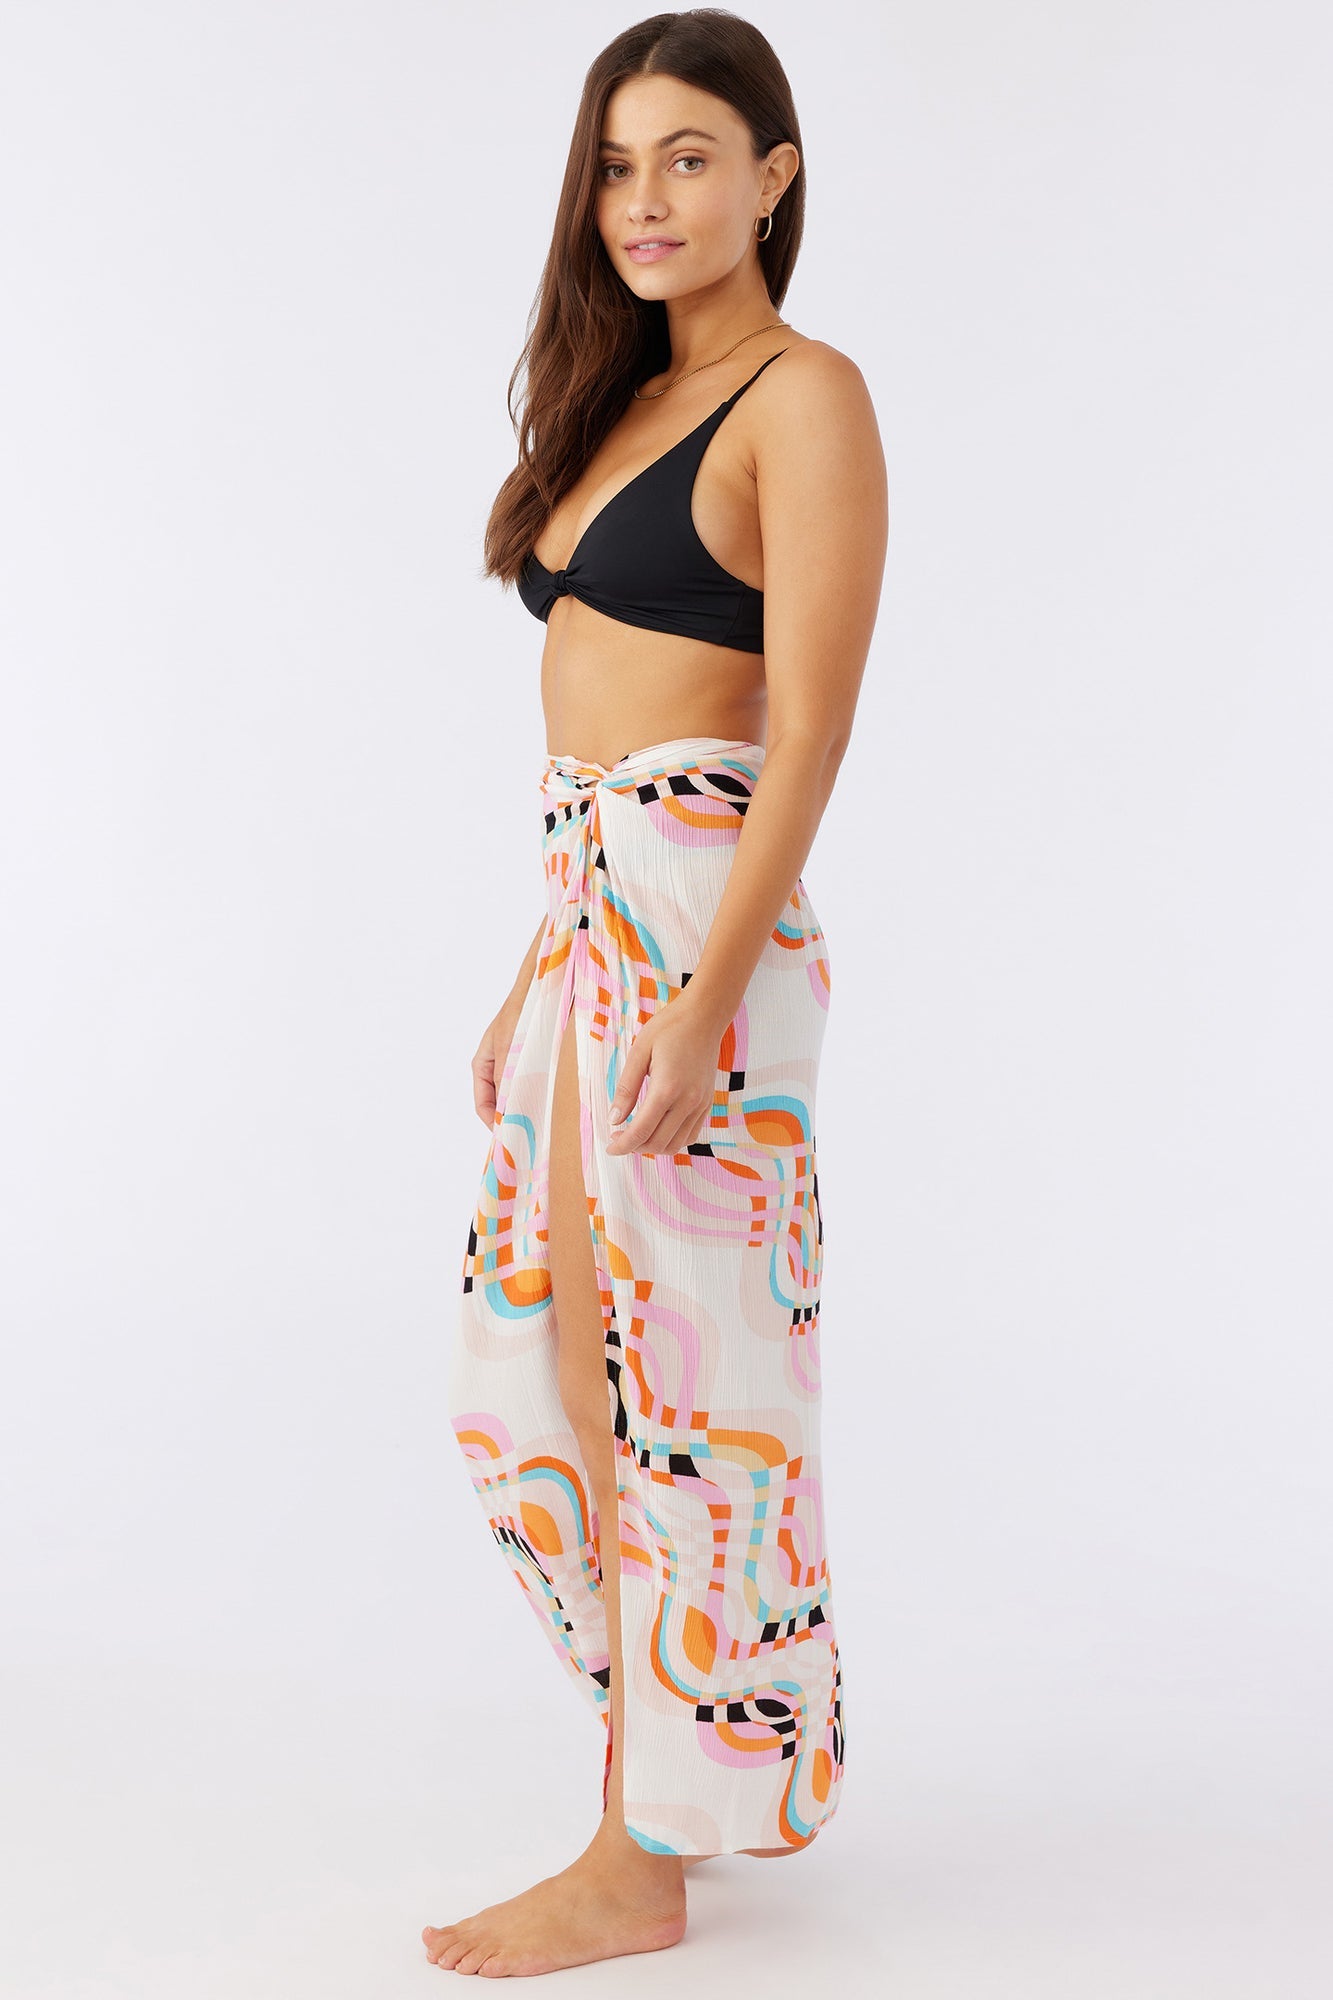 COVER-UP-JUPE-PAREO-HANALEI-PRINT-ONEILL-SP2415003-DM2-SHOP-04